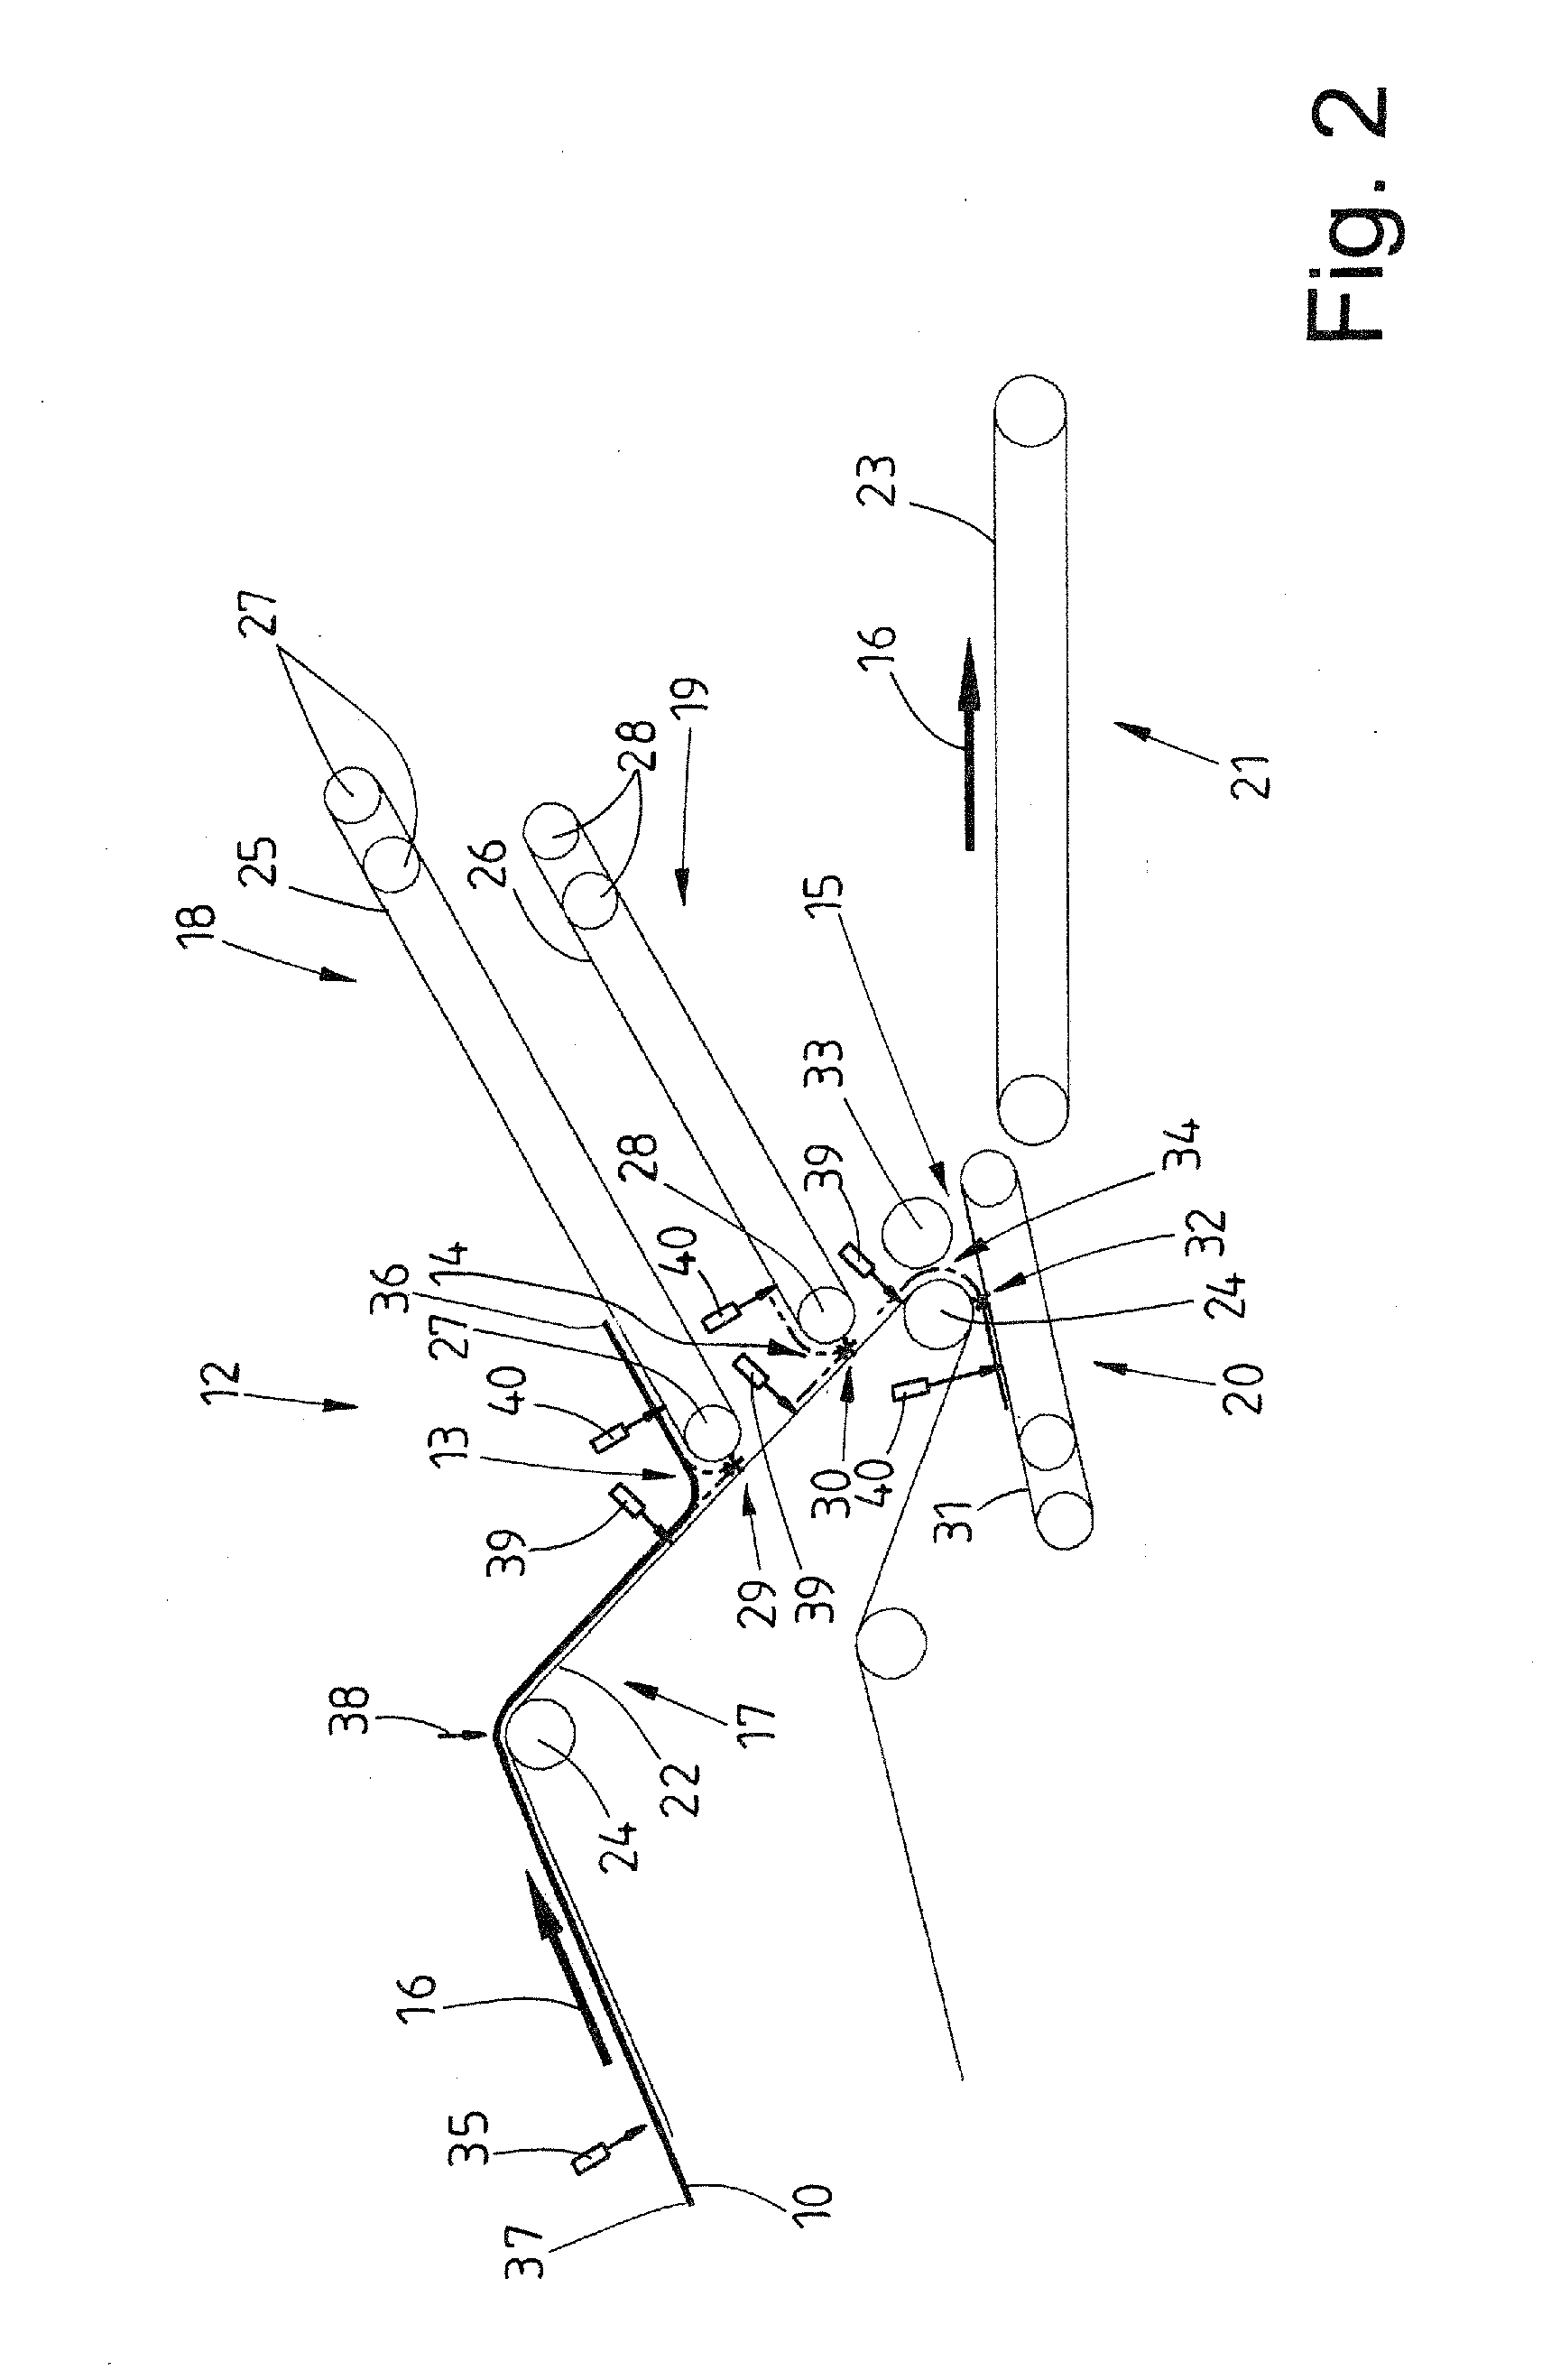 Method of, and apparatus for, folding items of laundry